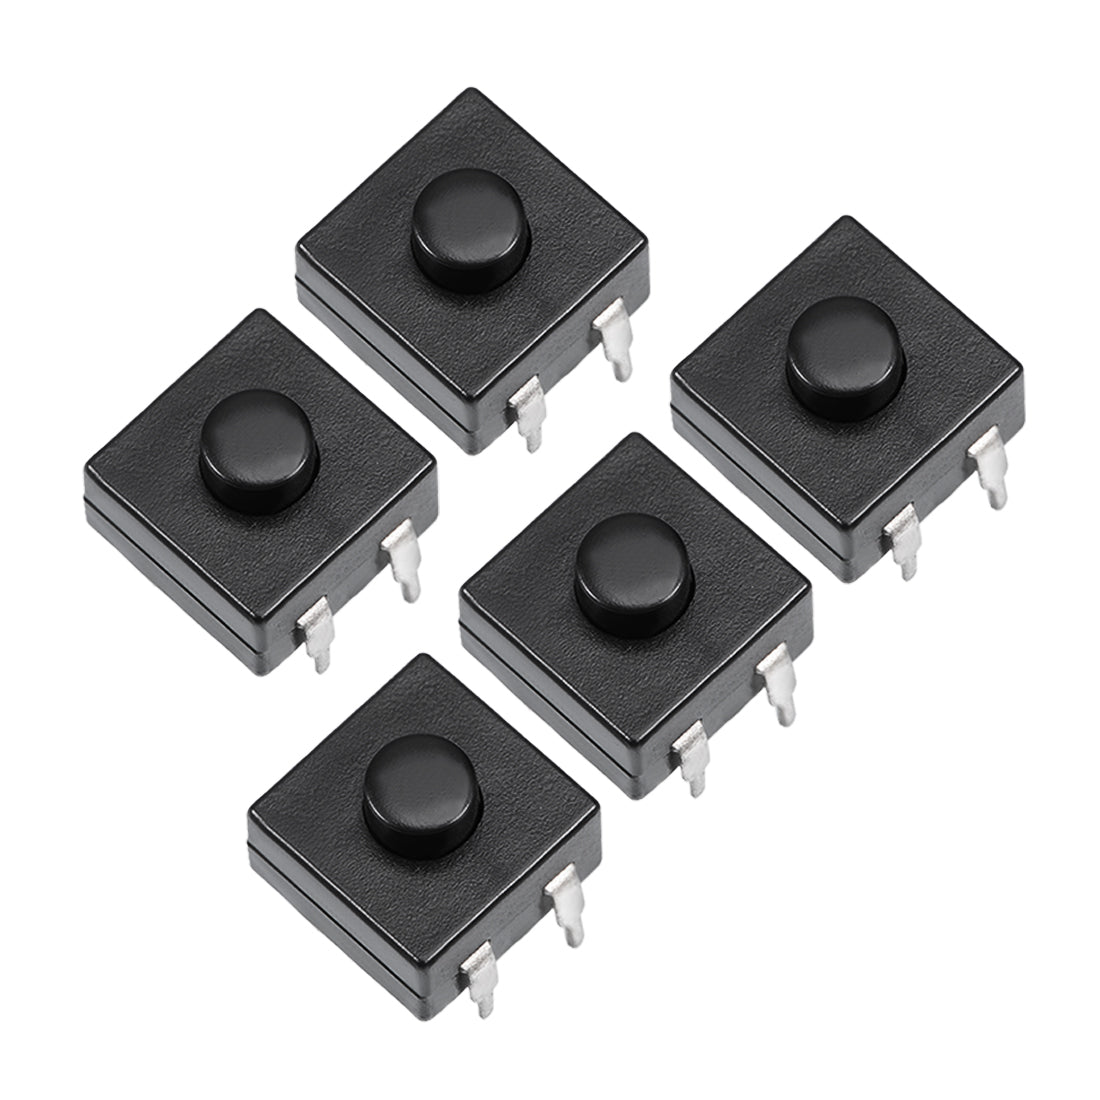 Pack of 50 HQ 6*6*9mm Tactile PushButton Switch SPST 